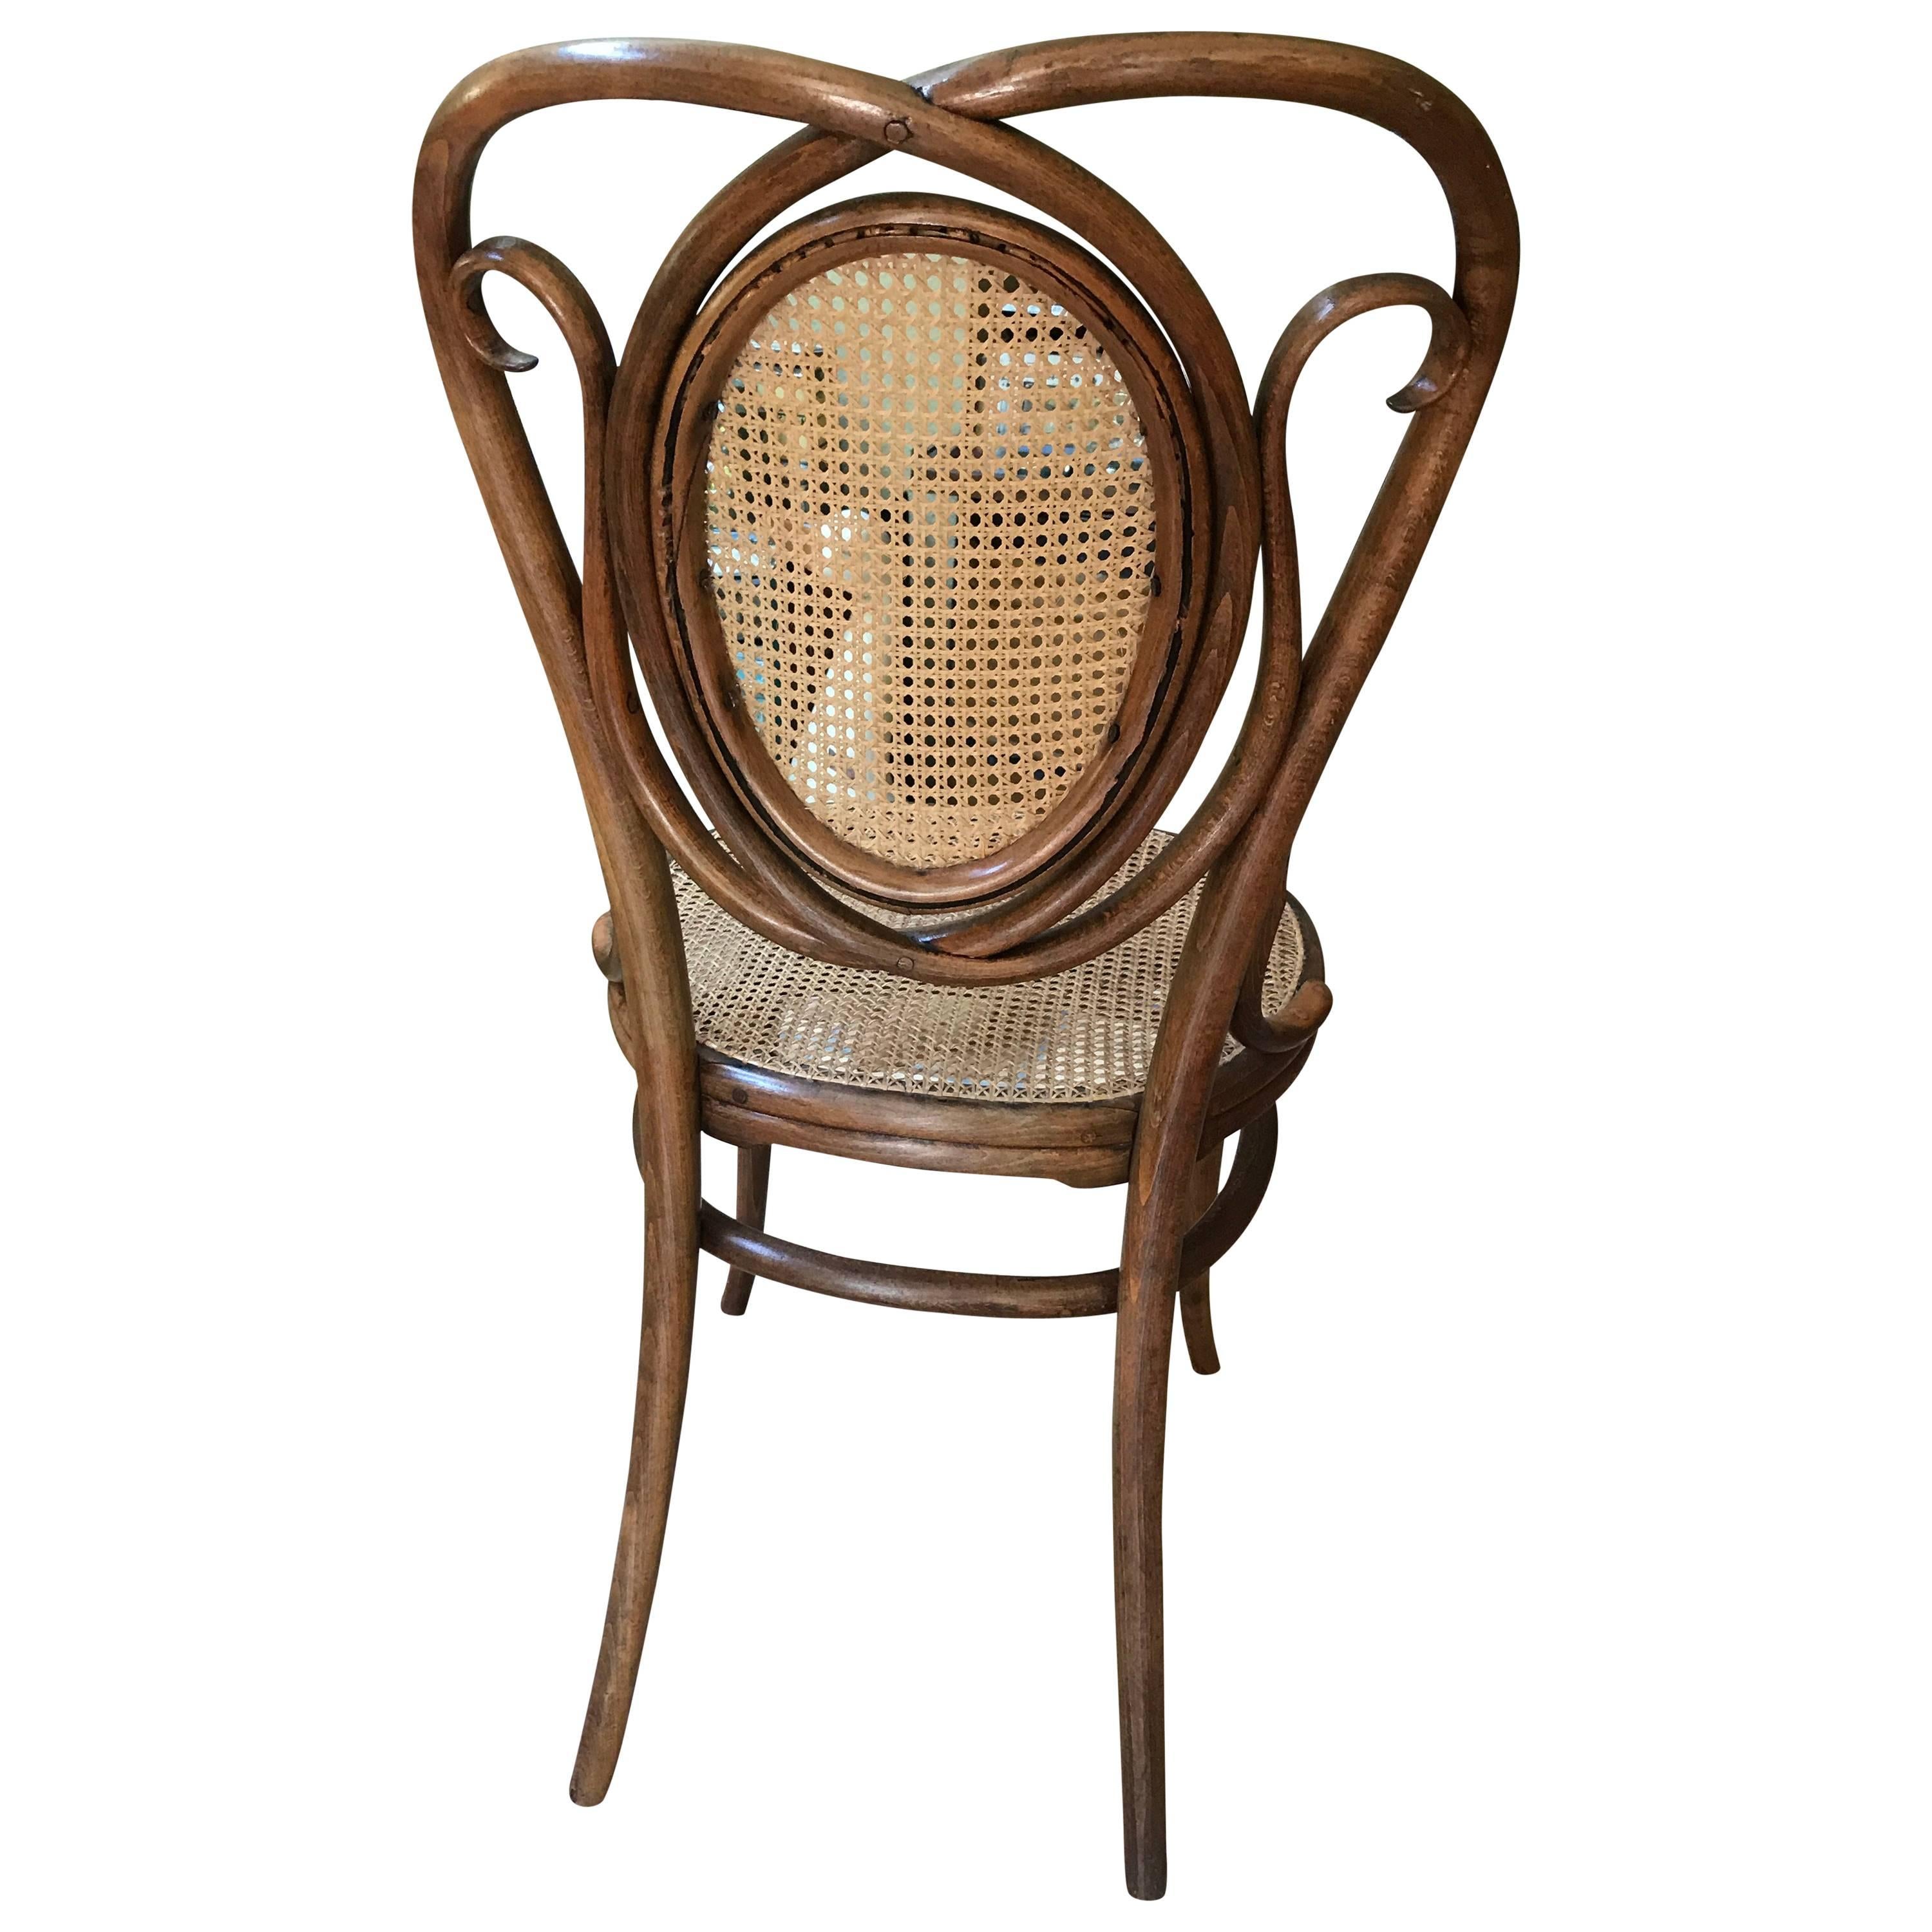 Thonet  bentwood Nr 22 Beech Natural Chair Collectors Item "1890" For Sale